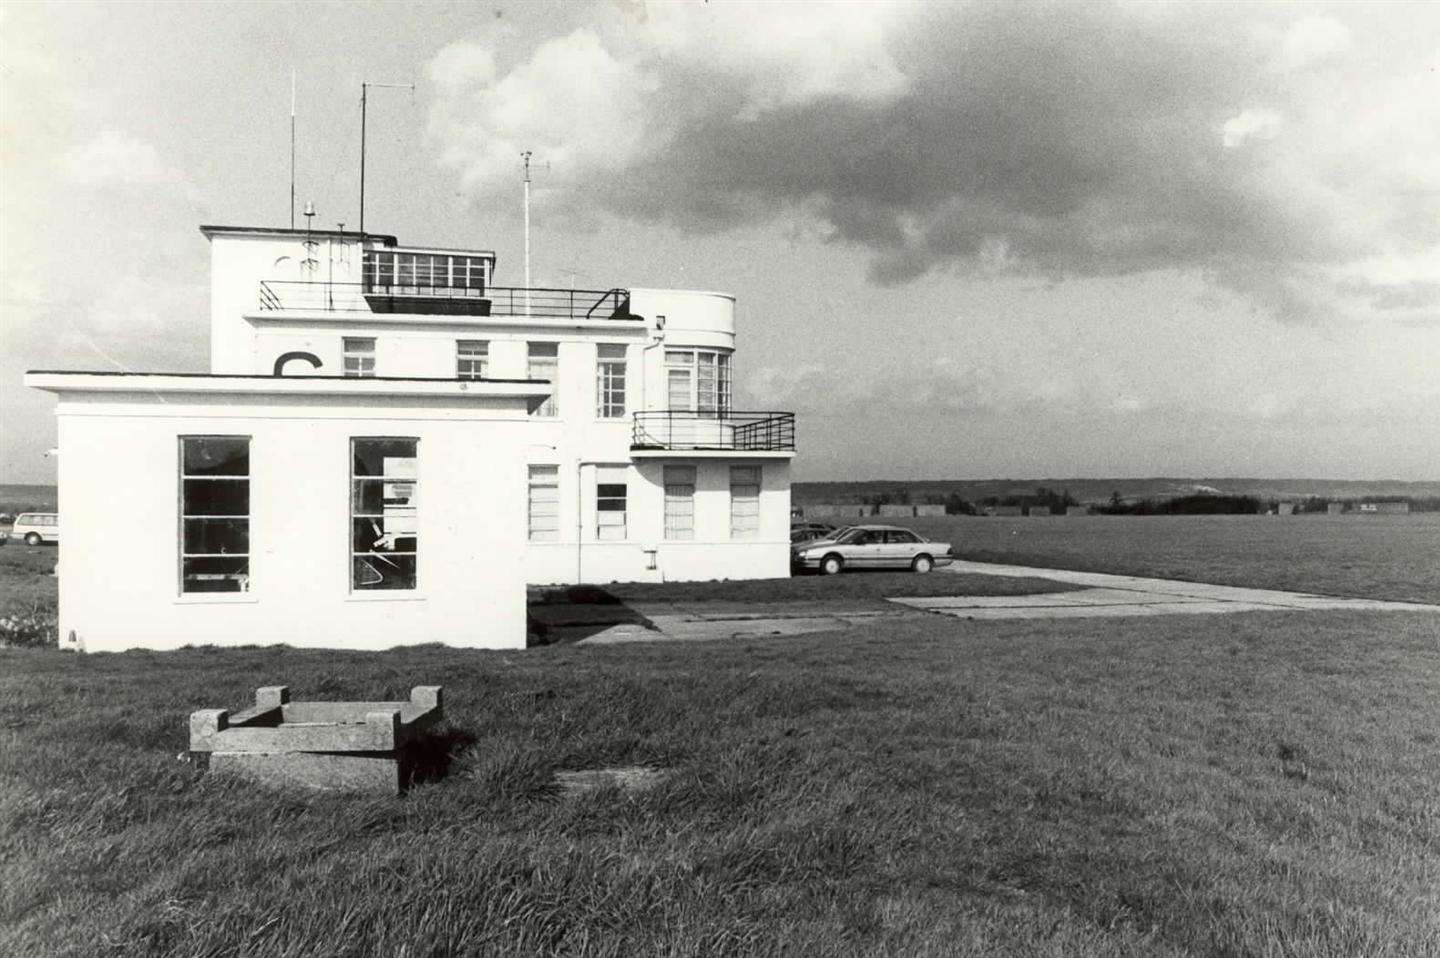 The control tower located on the old site of West Malling Airfield